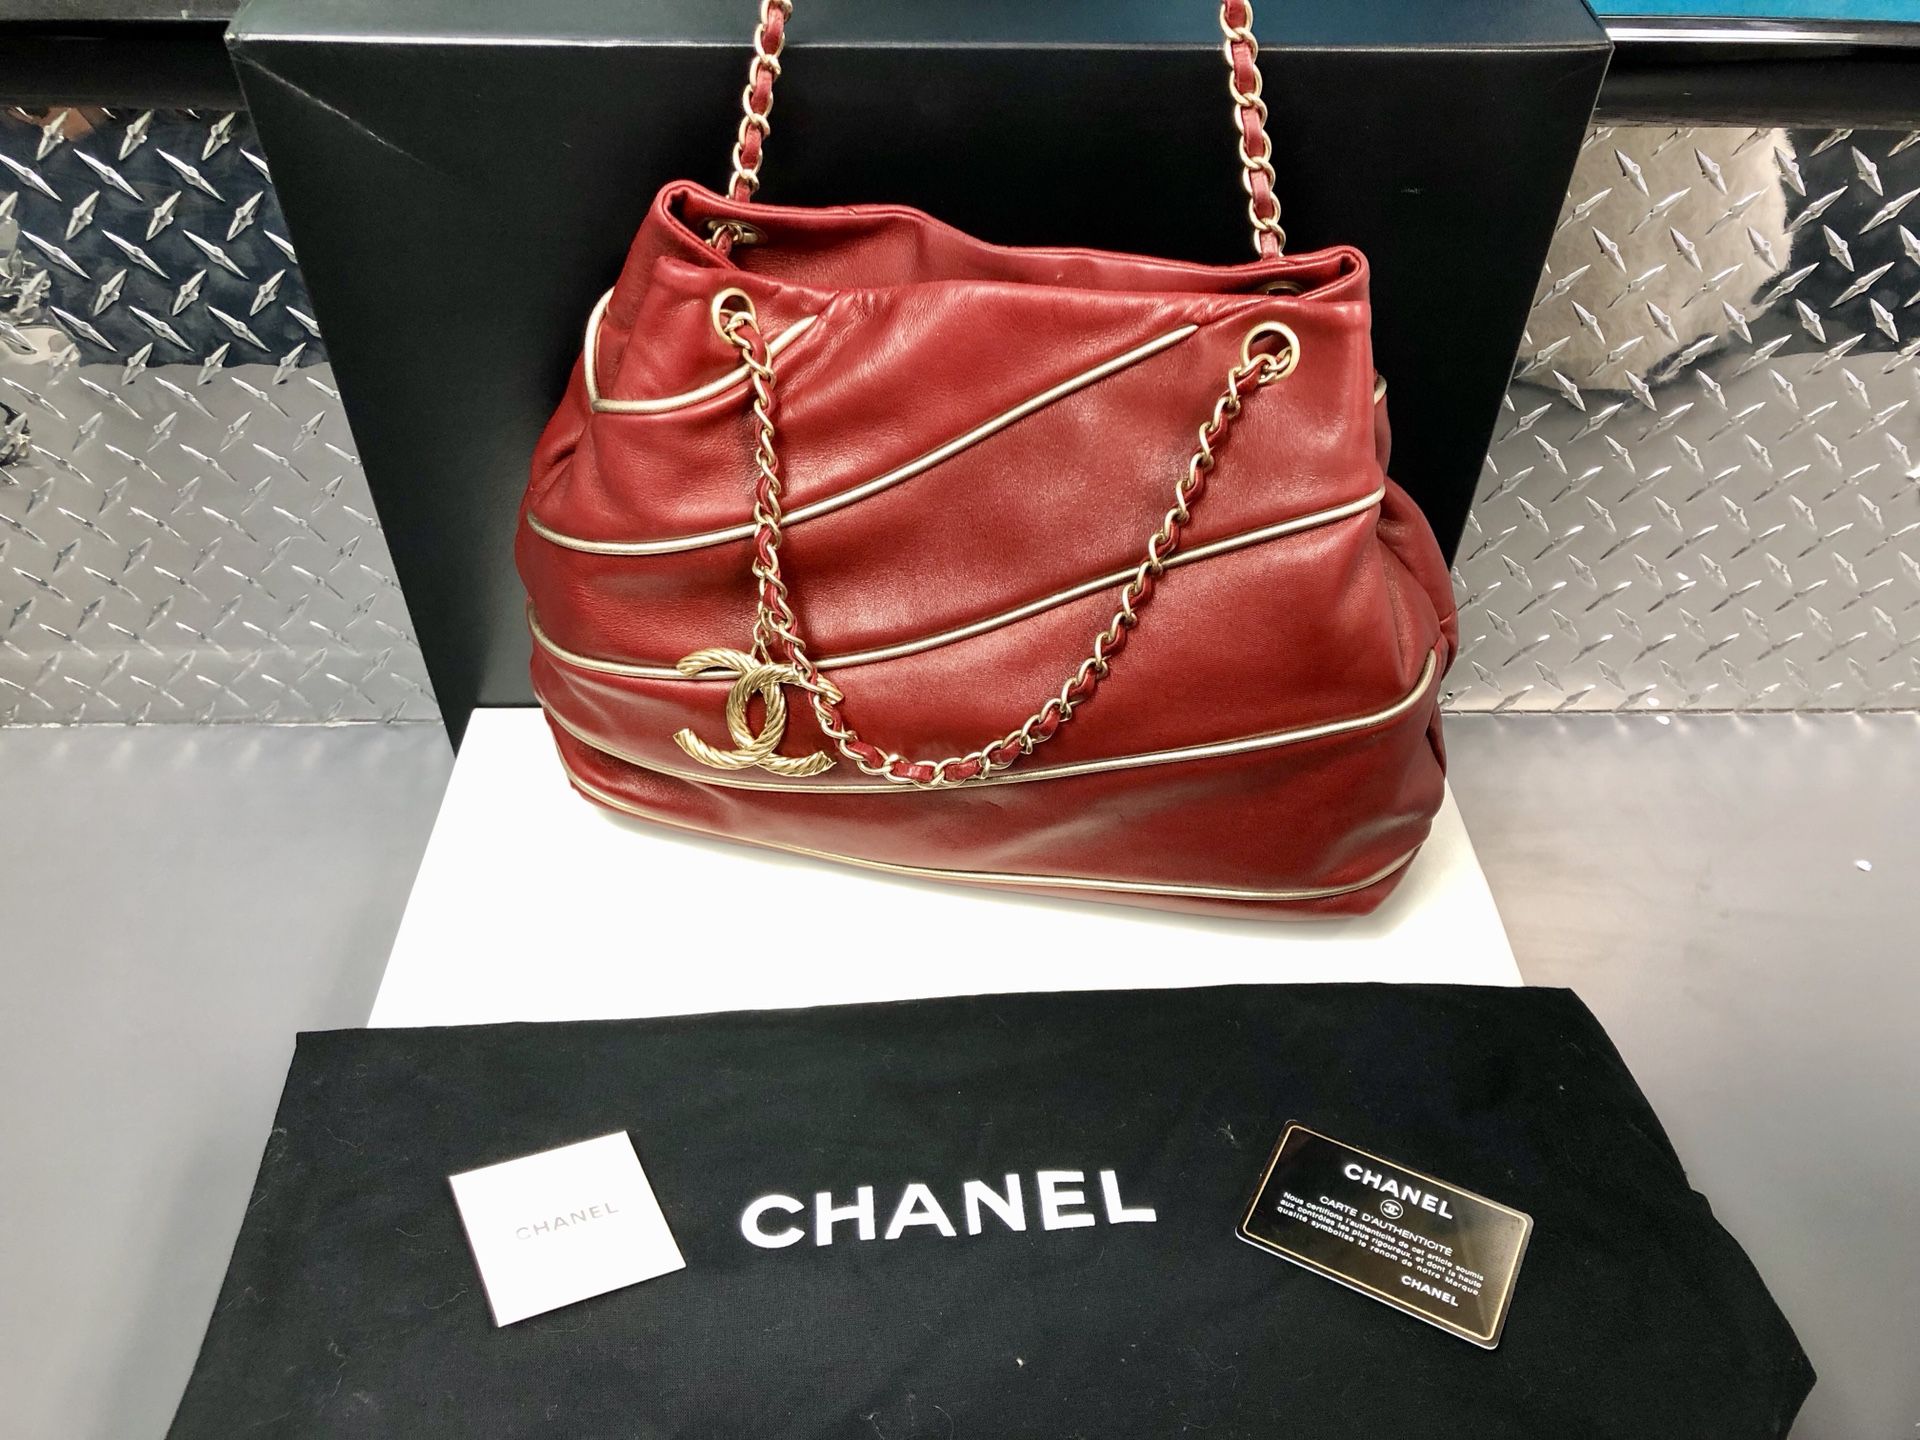 Chanel Bag (Very Well Maintained)- Has Authenticated Card